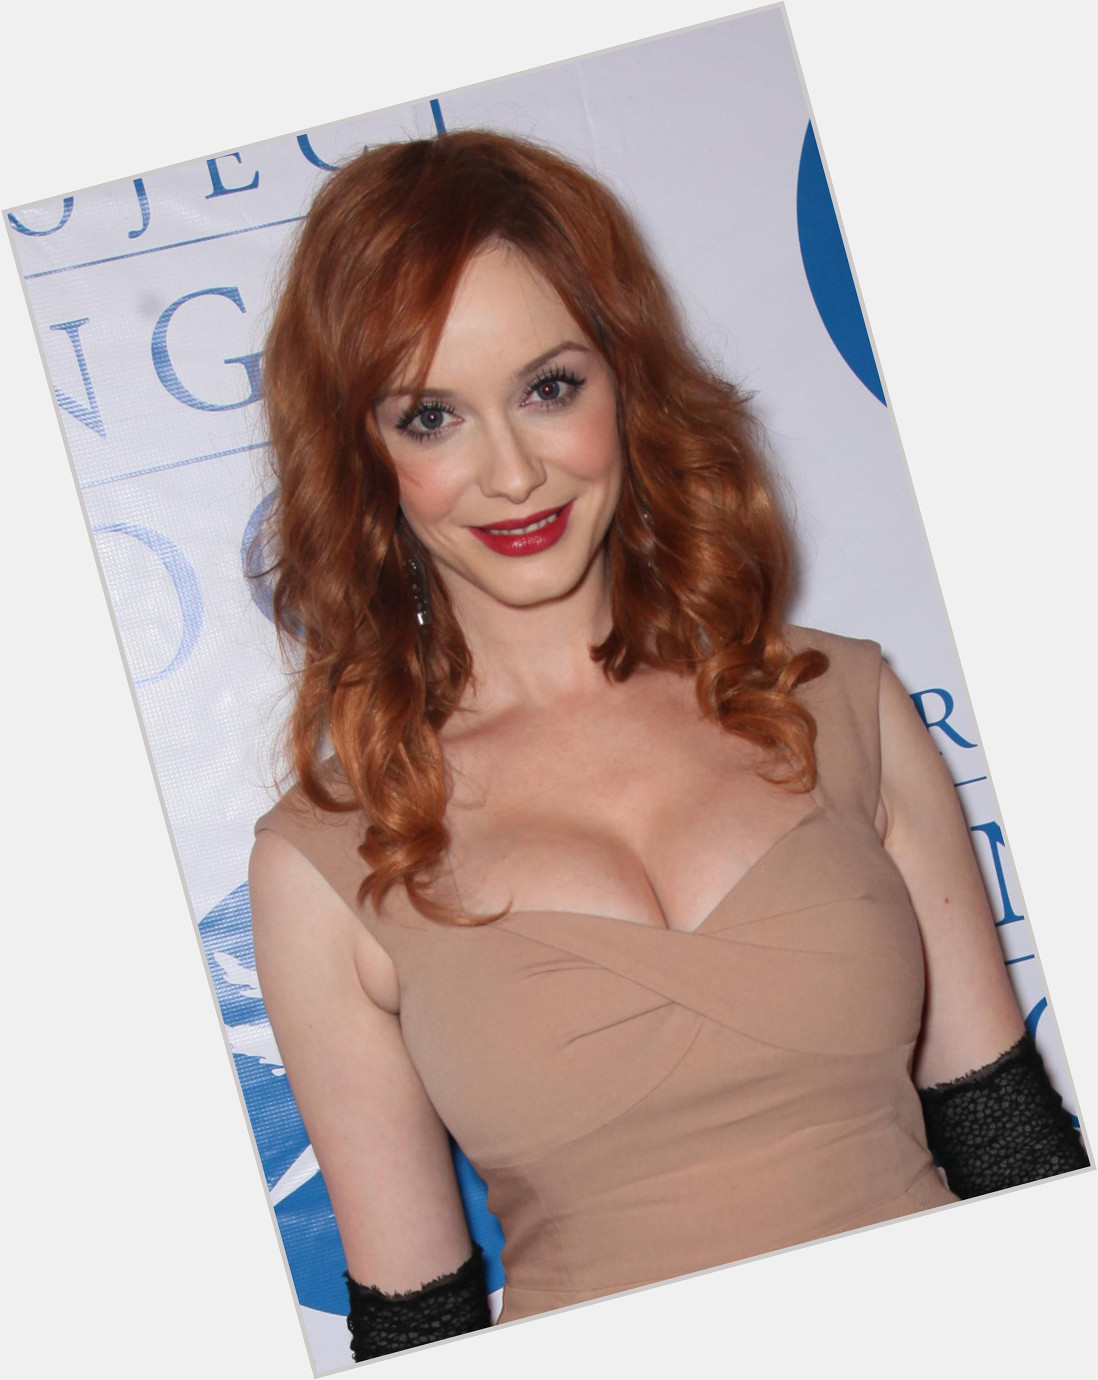 Can\t believe Christina Hendricks is 45 today. Happy Birthday to this gorgeous actress 